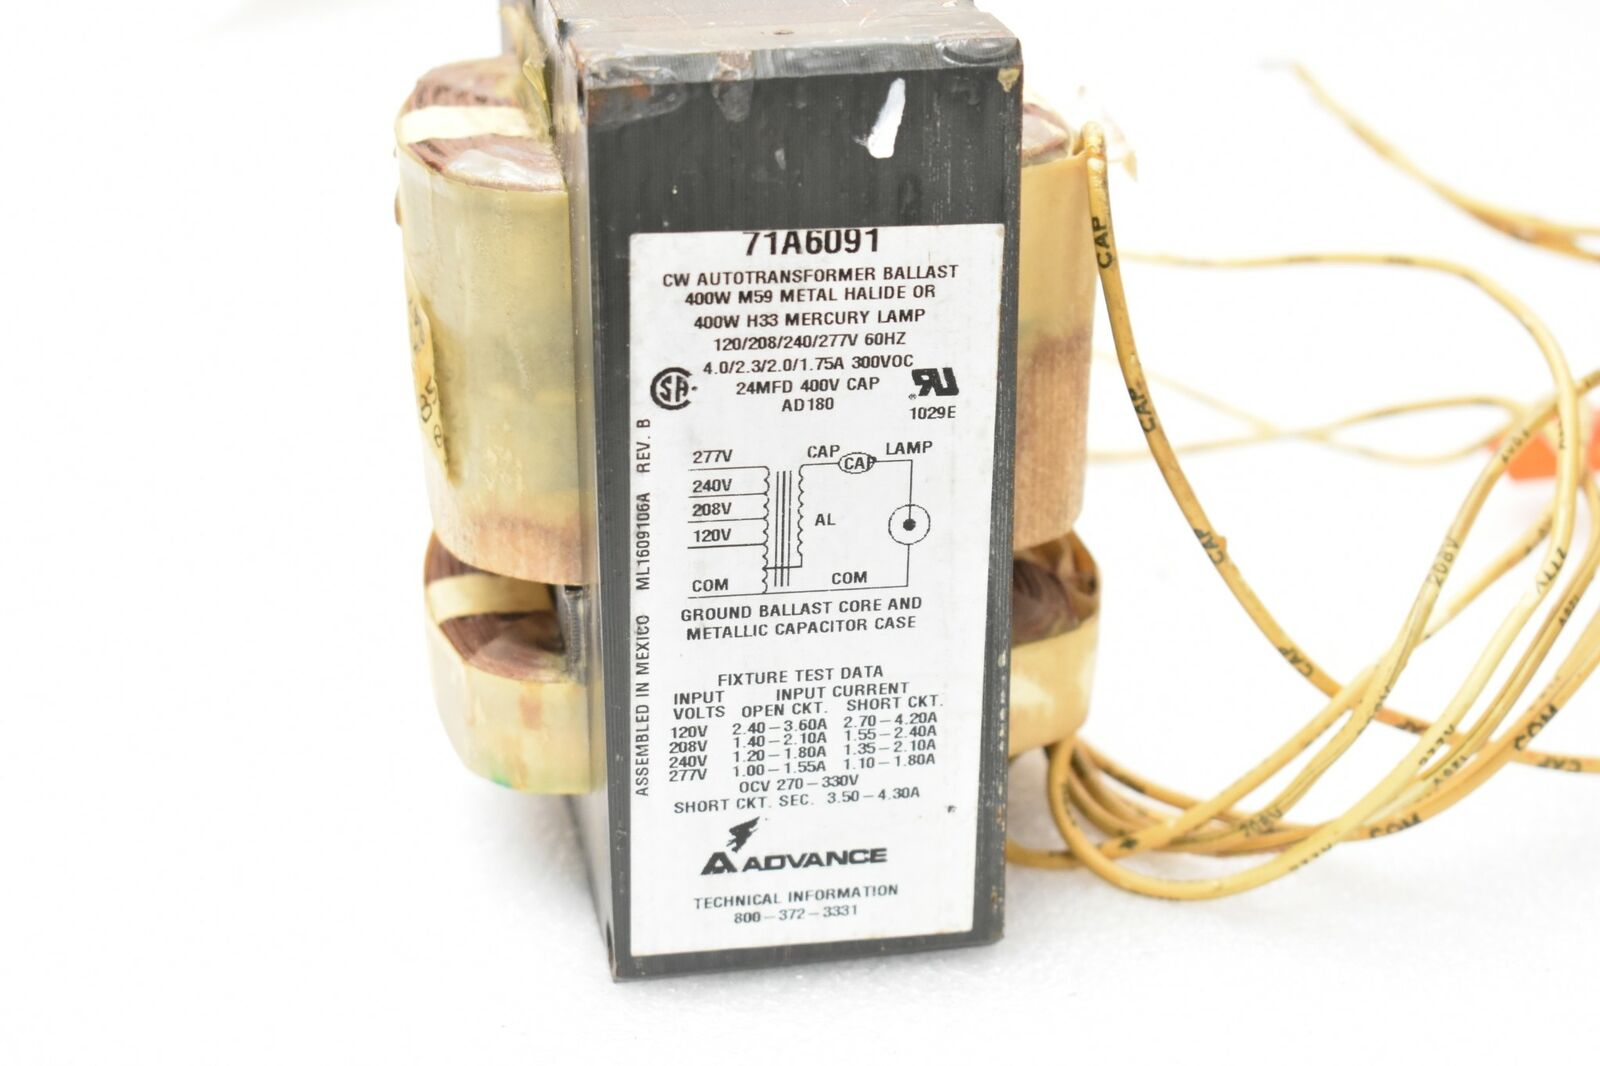 NEW  Philips Advance 71A6071-001D Ballast Kit *FREE SHIPPING*